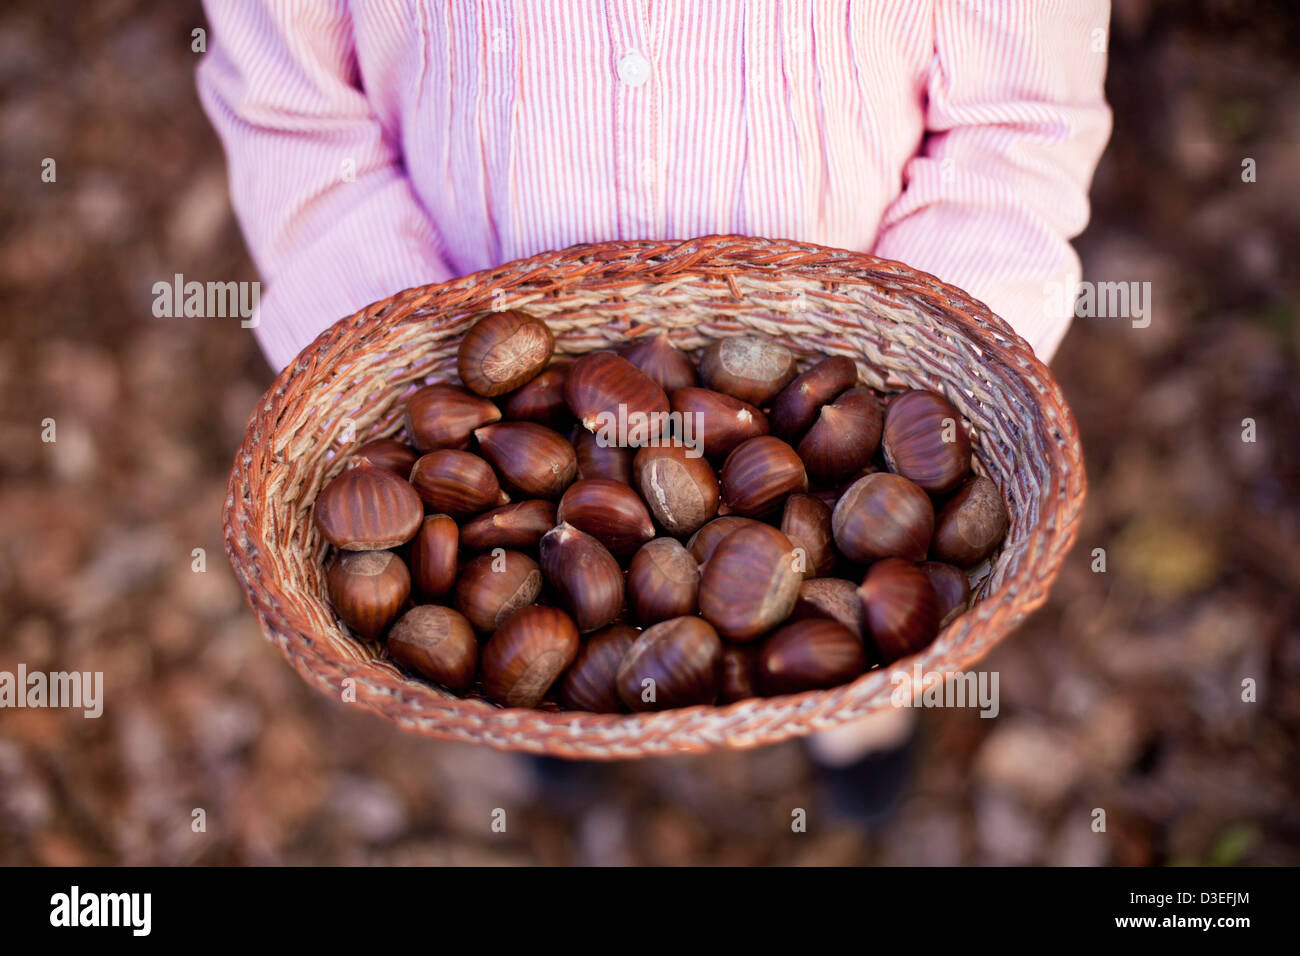 Girl with a basket full of chestnuts in an autumn background Stock Photo